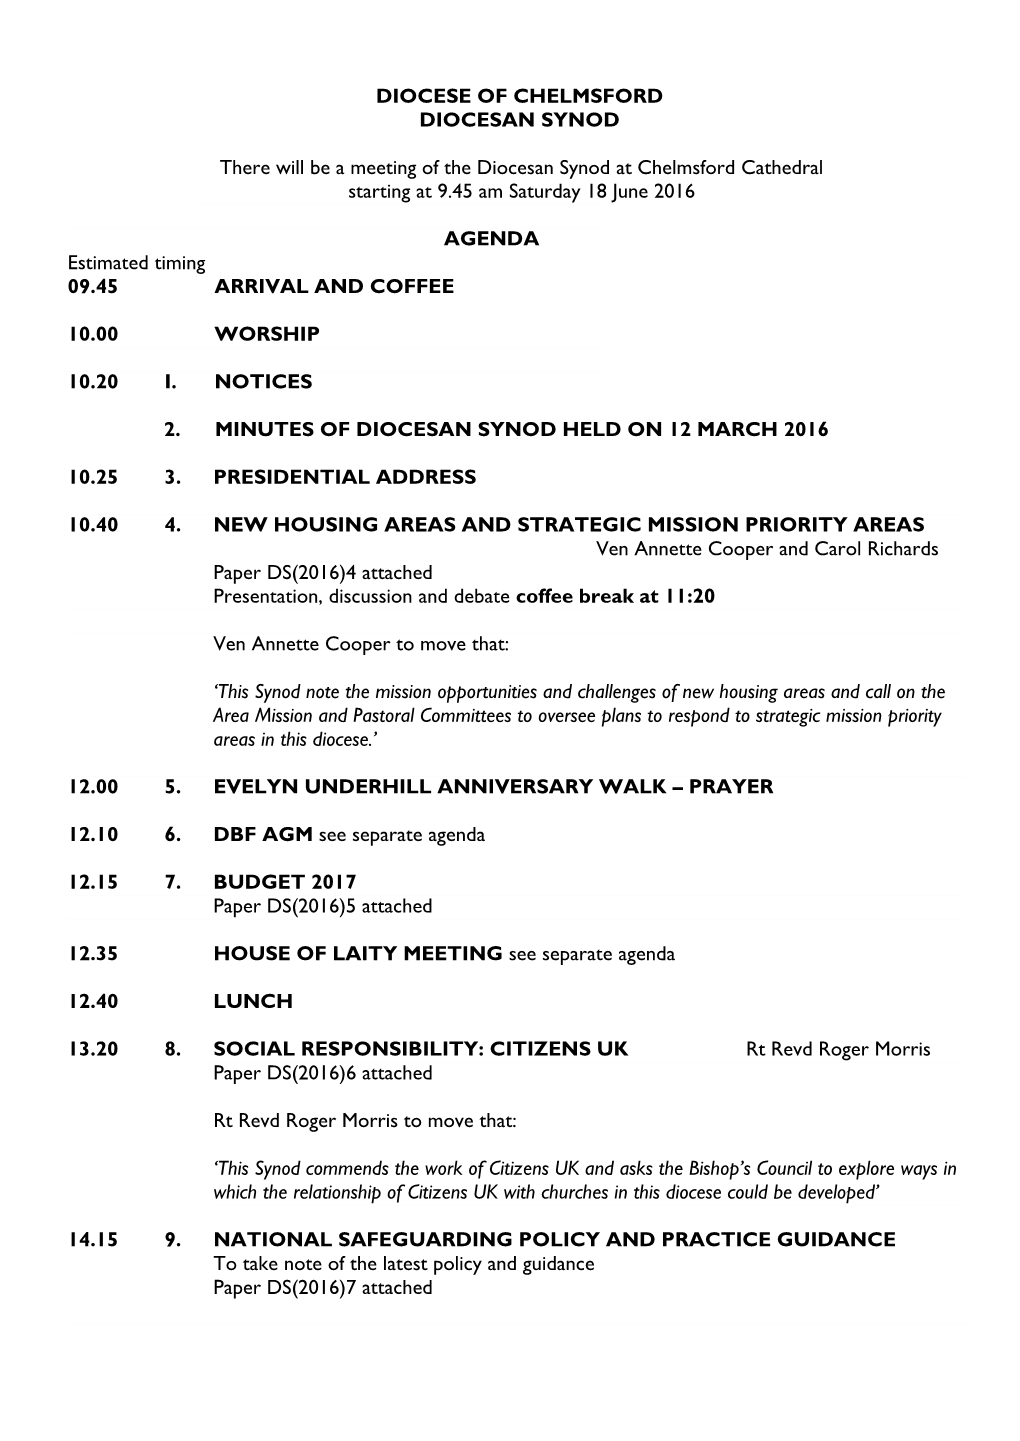 AGENDA Estimated Timing 09.45 ARRIVAL and COFFEE